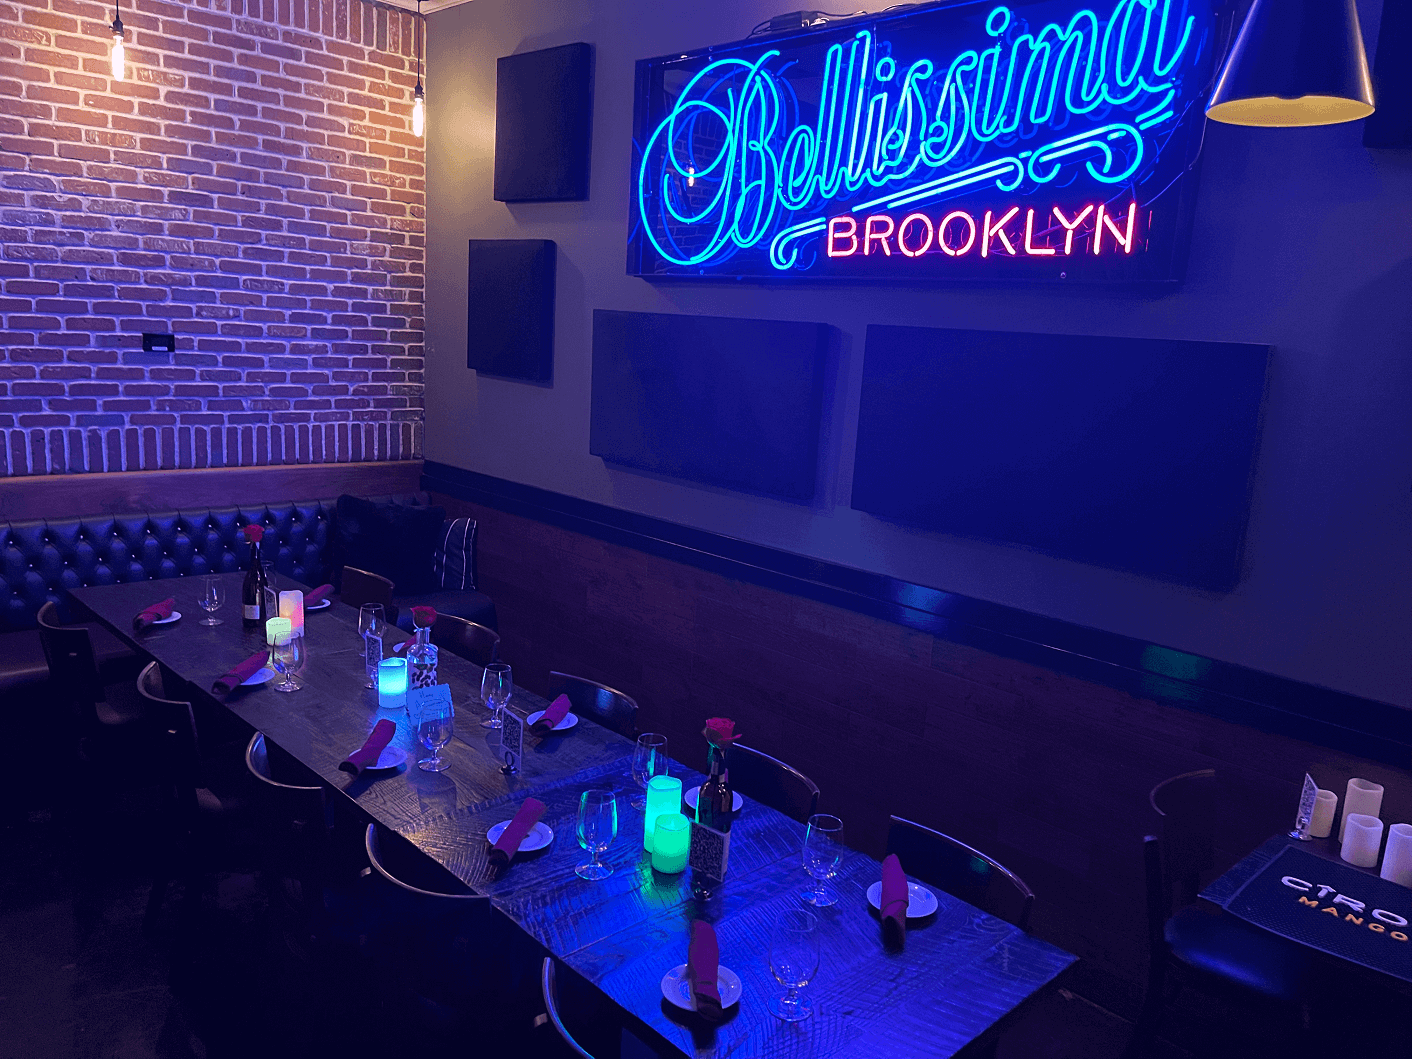 Interior of Brooklyn Trattoria's event space. A long table with bench seating under a neon sign that reads 'Bellissima Brooklyn'